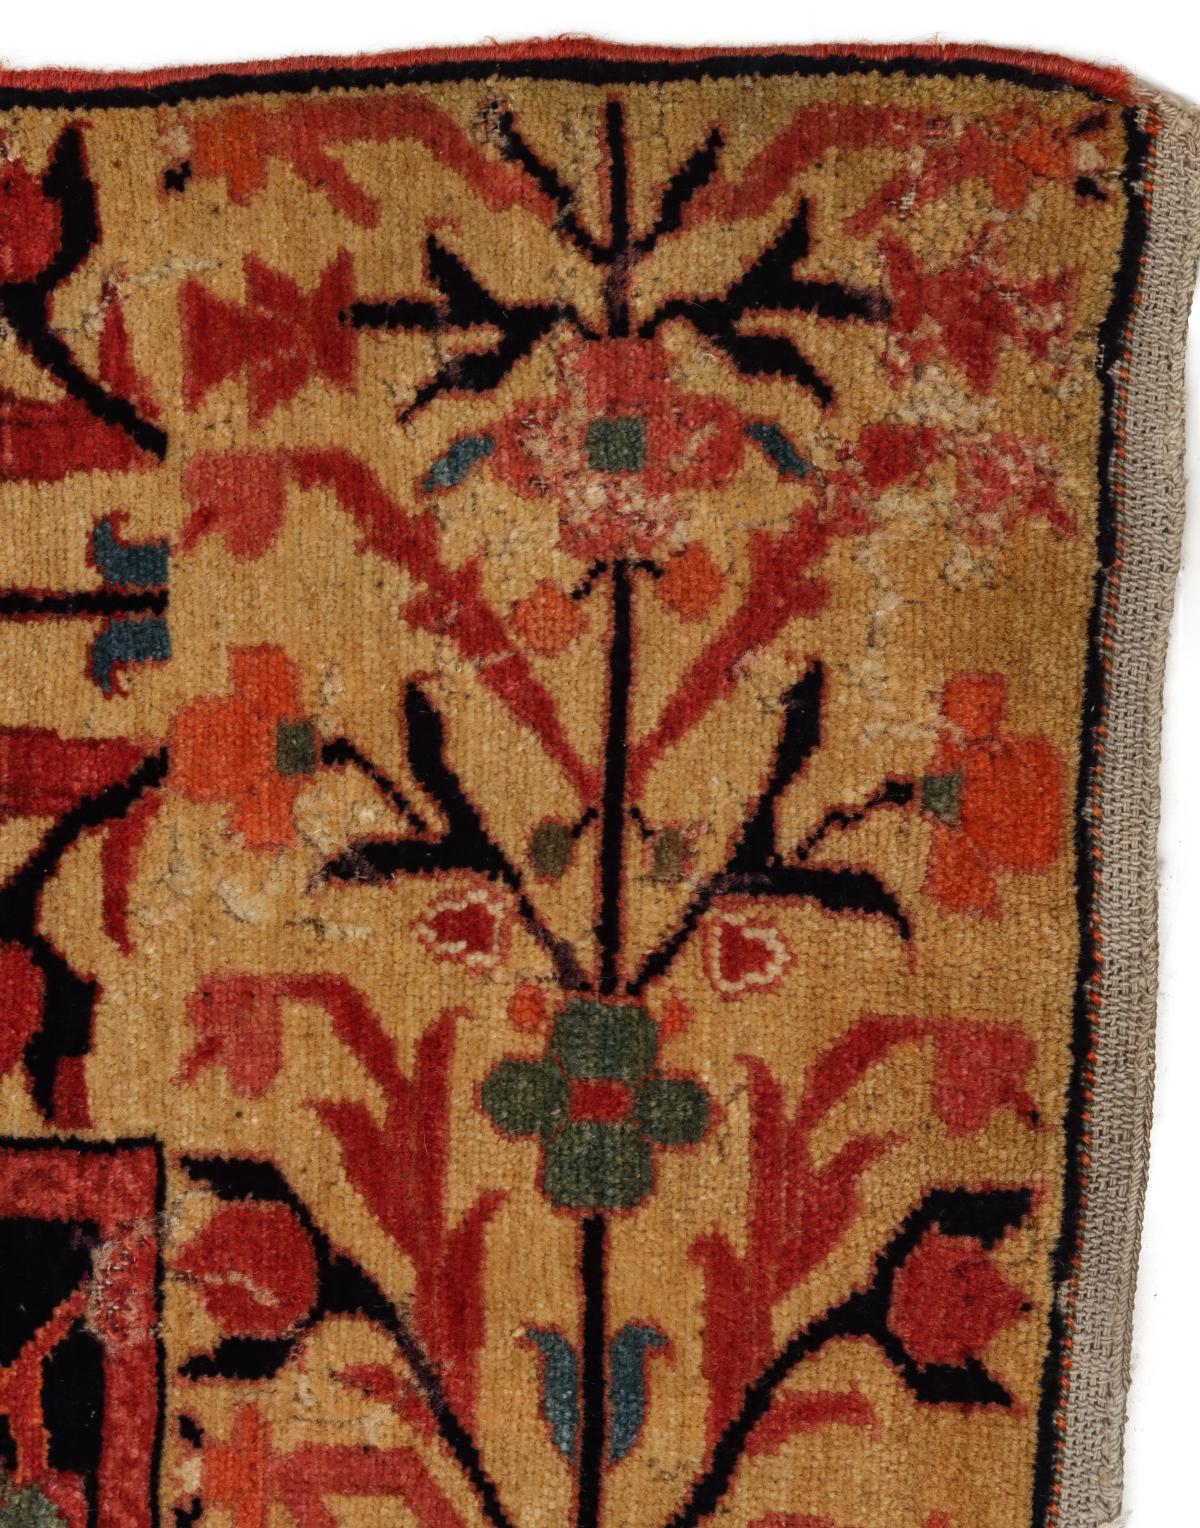 A FINE PERSIAN MALAYER PRAYER RUG WITH CYPRESS C. 1860